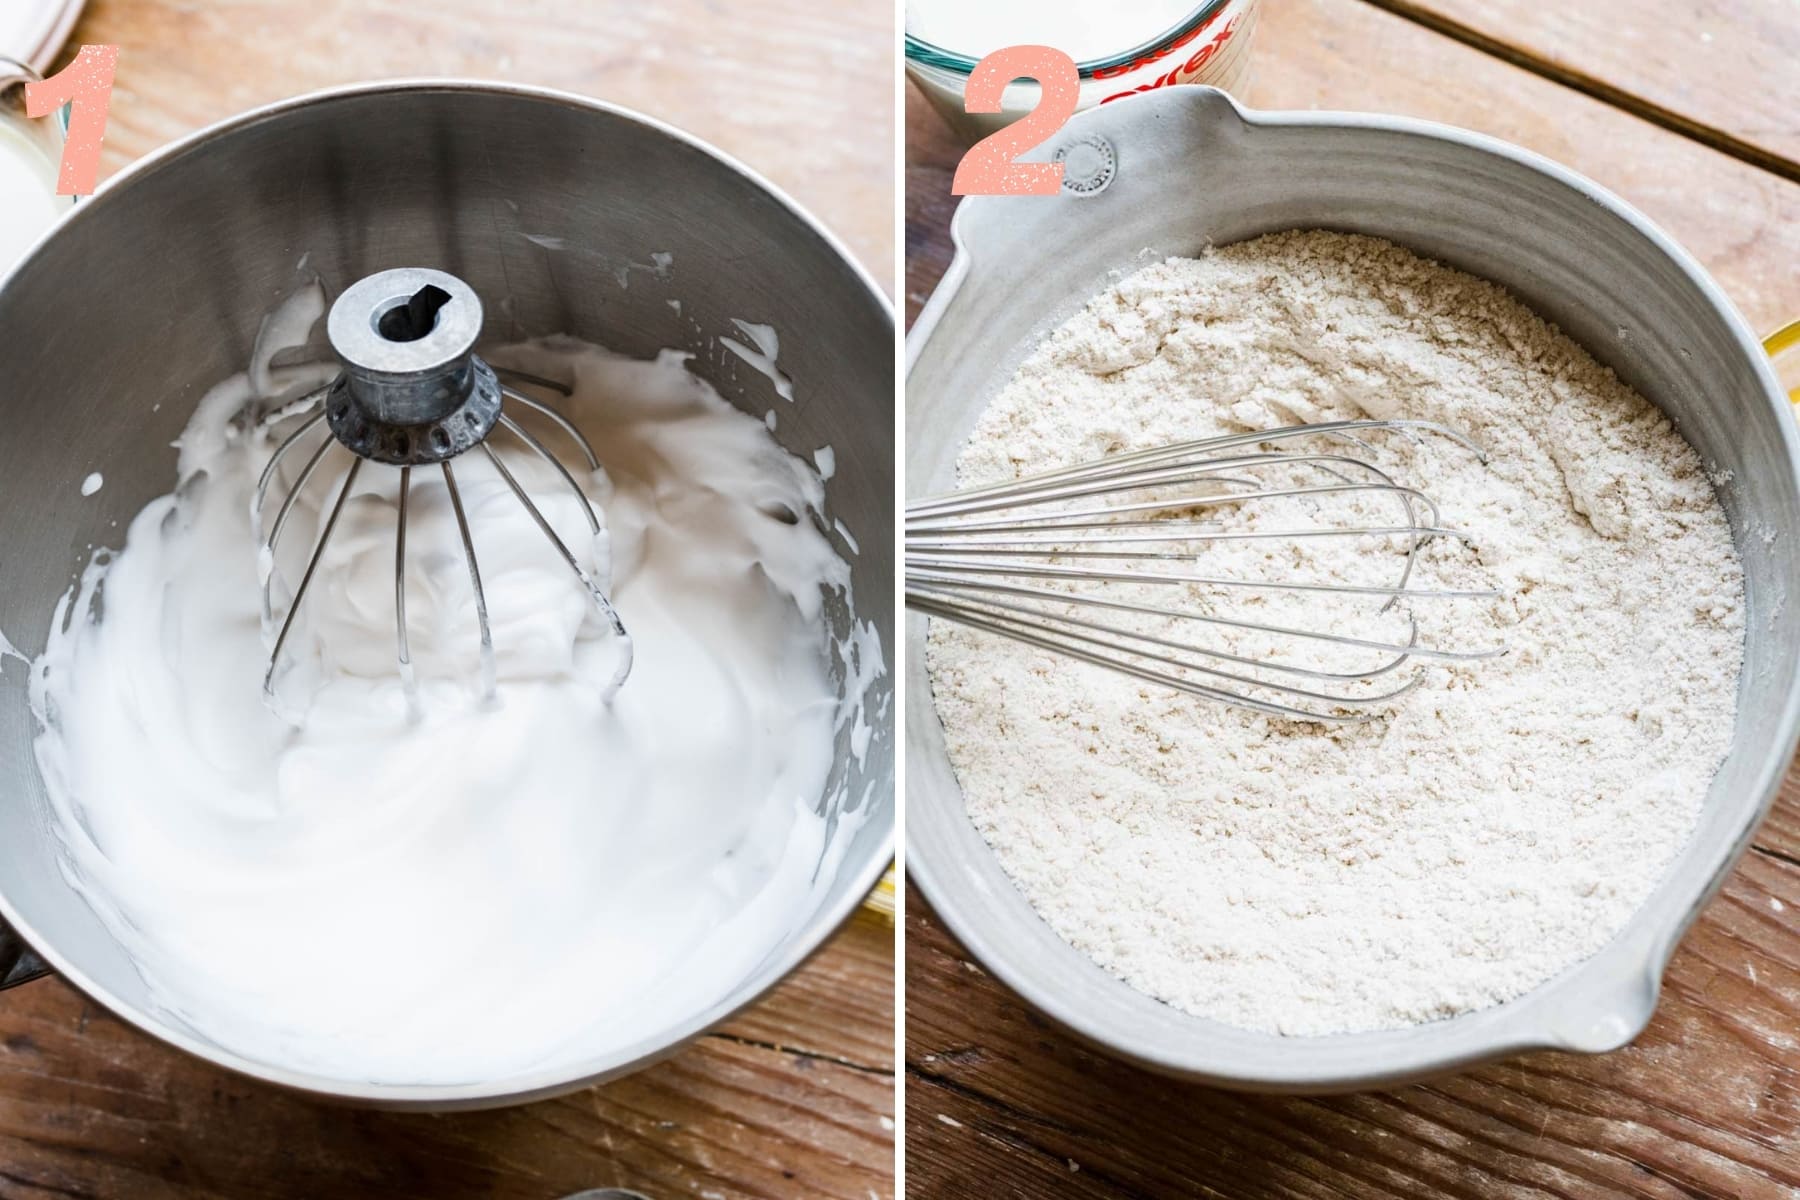 on the left: whipped aquafaba in a stand mixer bowl. on the right: dry ingredients for vegan waffles in a bowl.